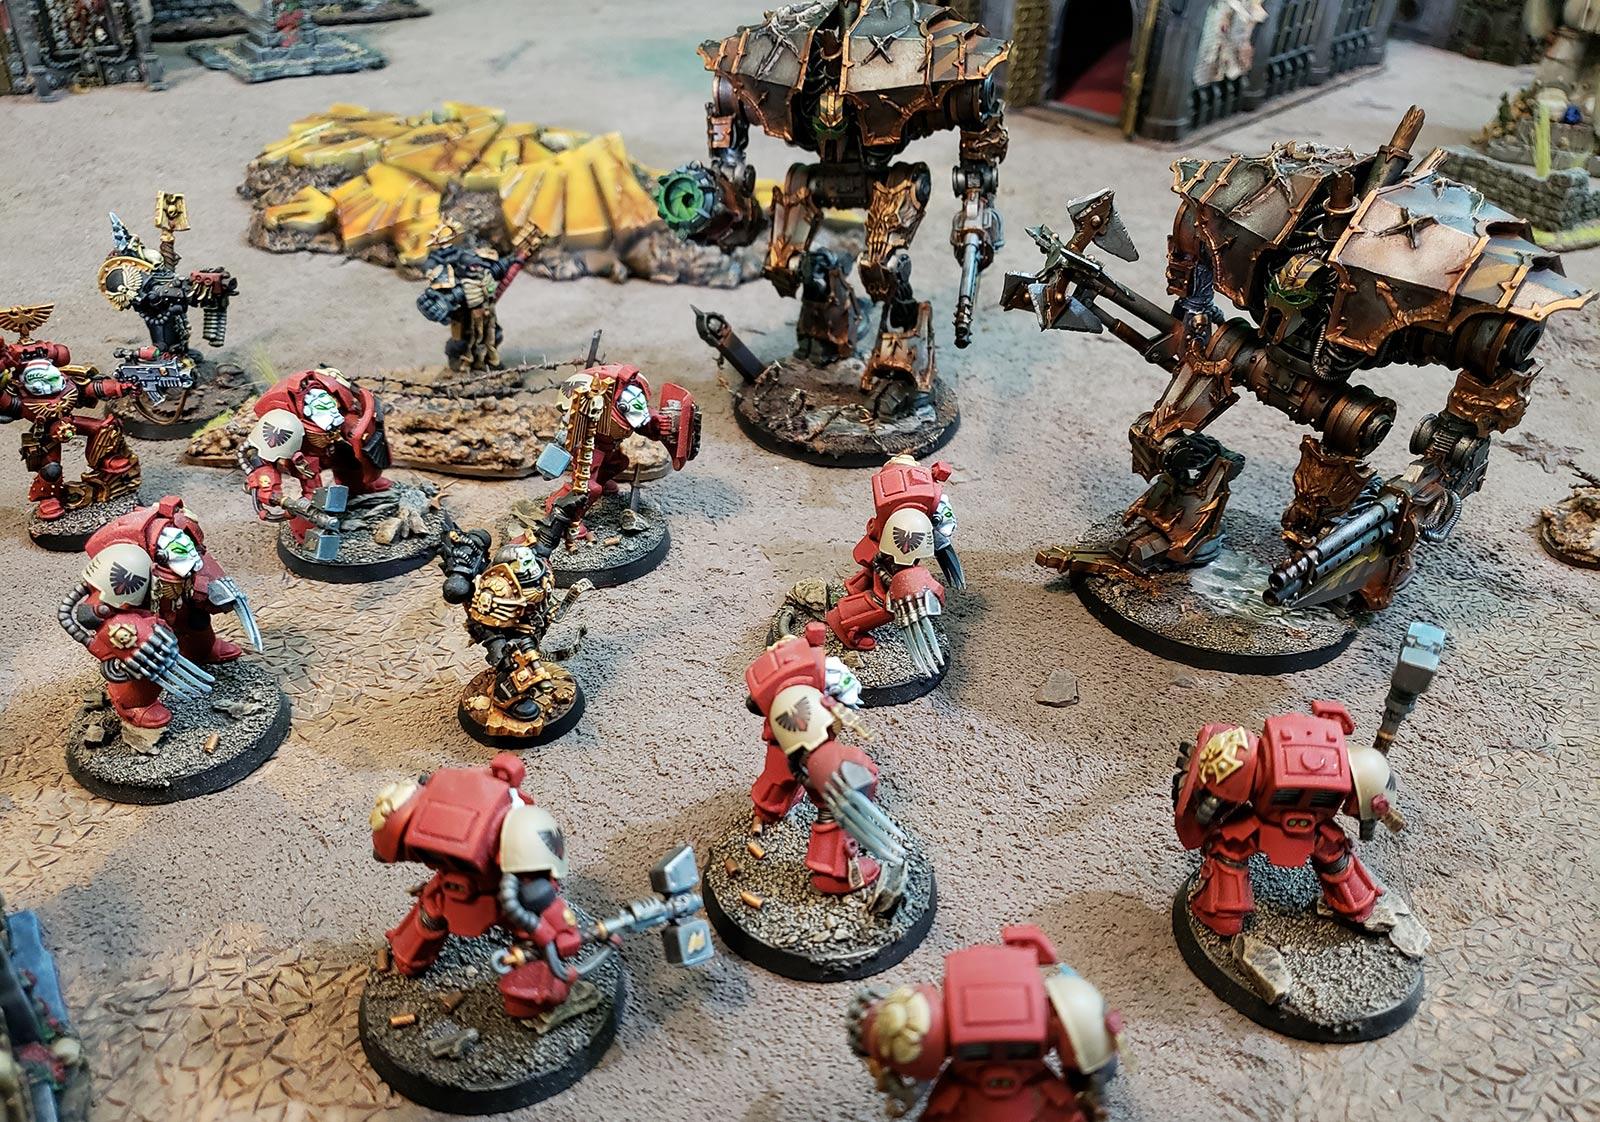 Butcher Cannon, Chaos, Chaos Space Marines, Daemon Engine, Demon Engine, Forge World, Iron Warriors, Siege Claw, Siege Claws, Soul Burner Petard